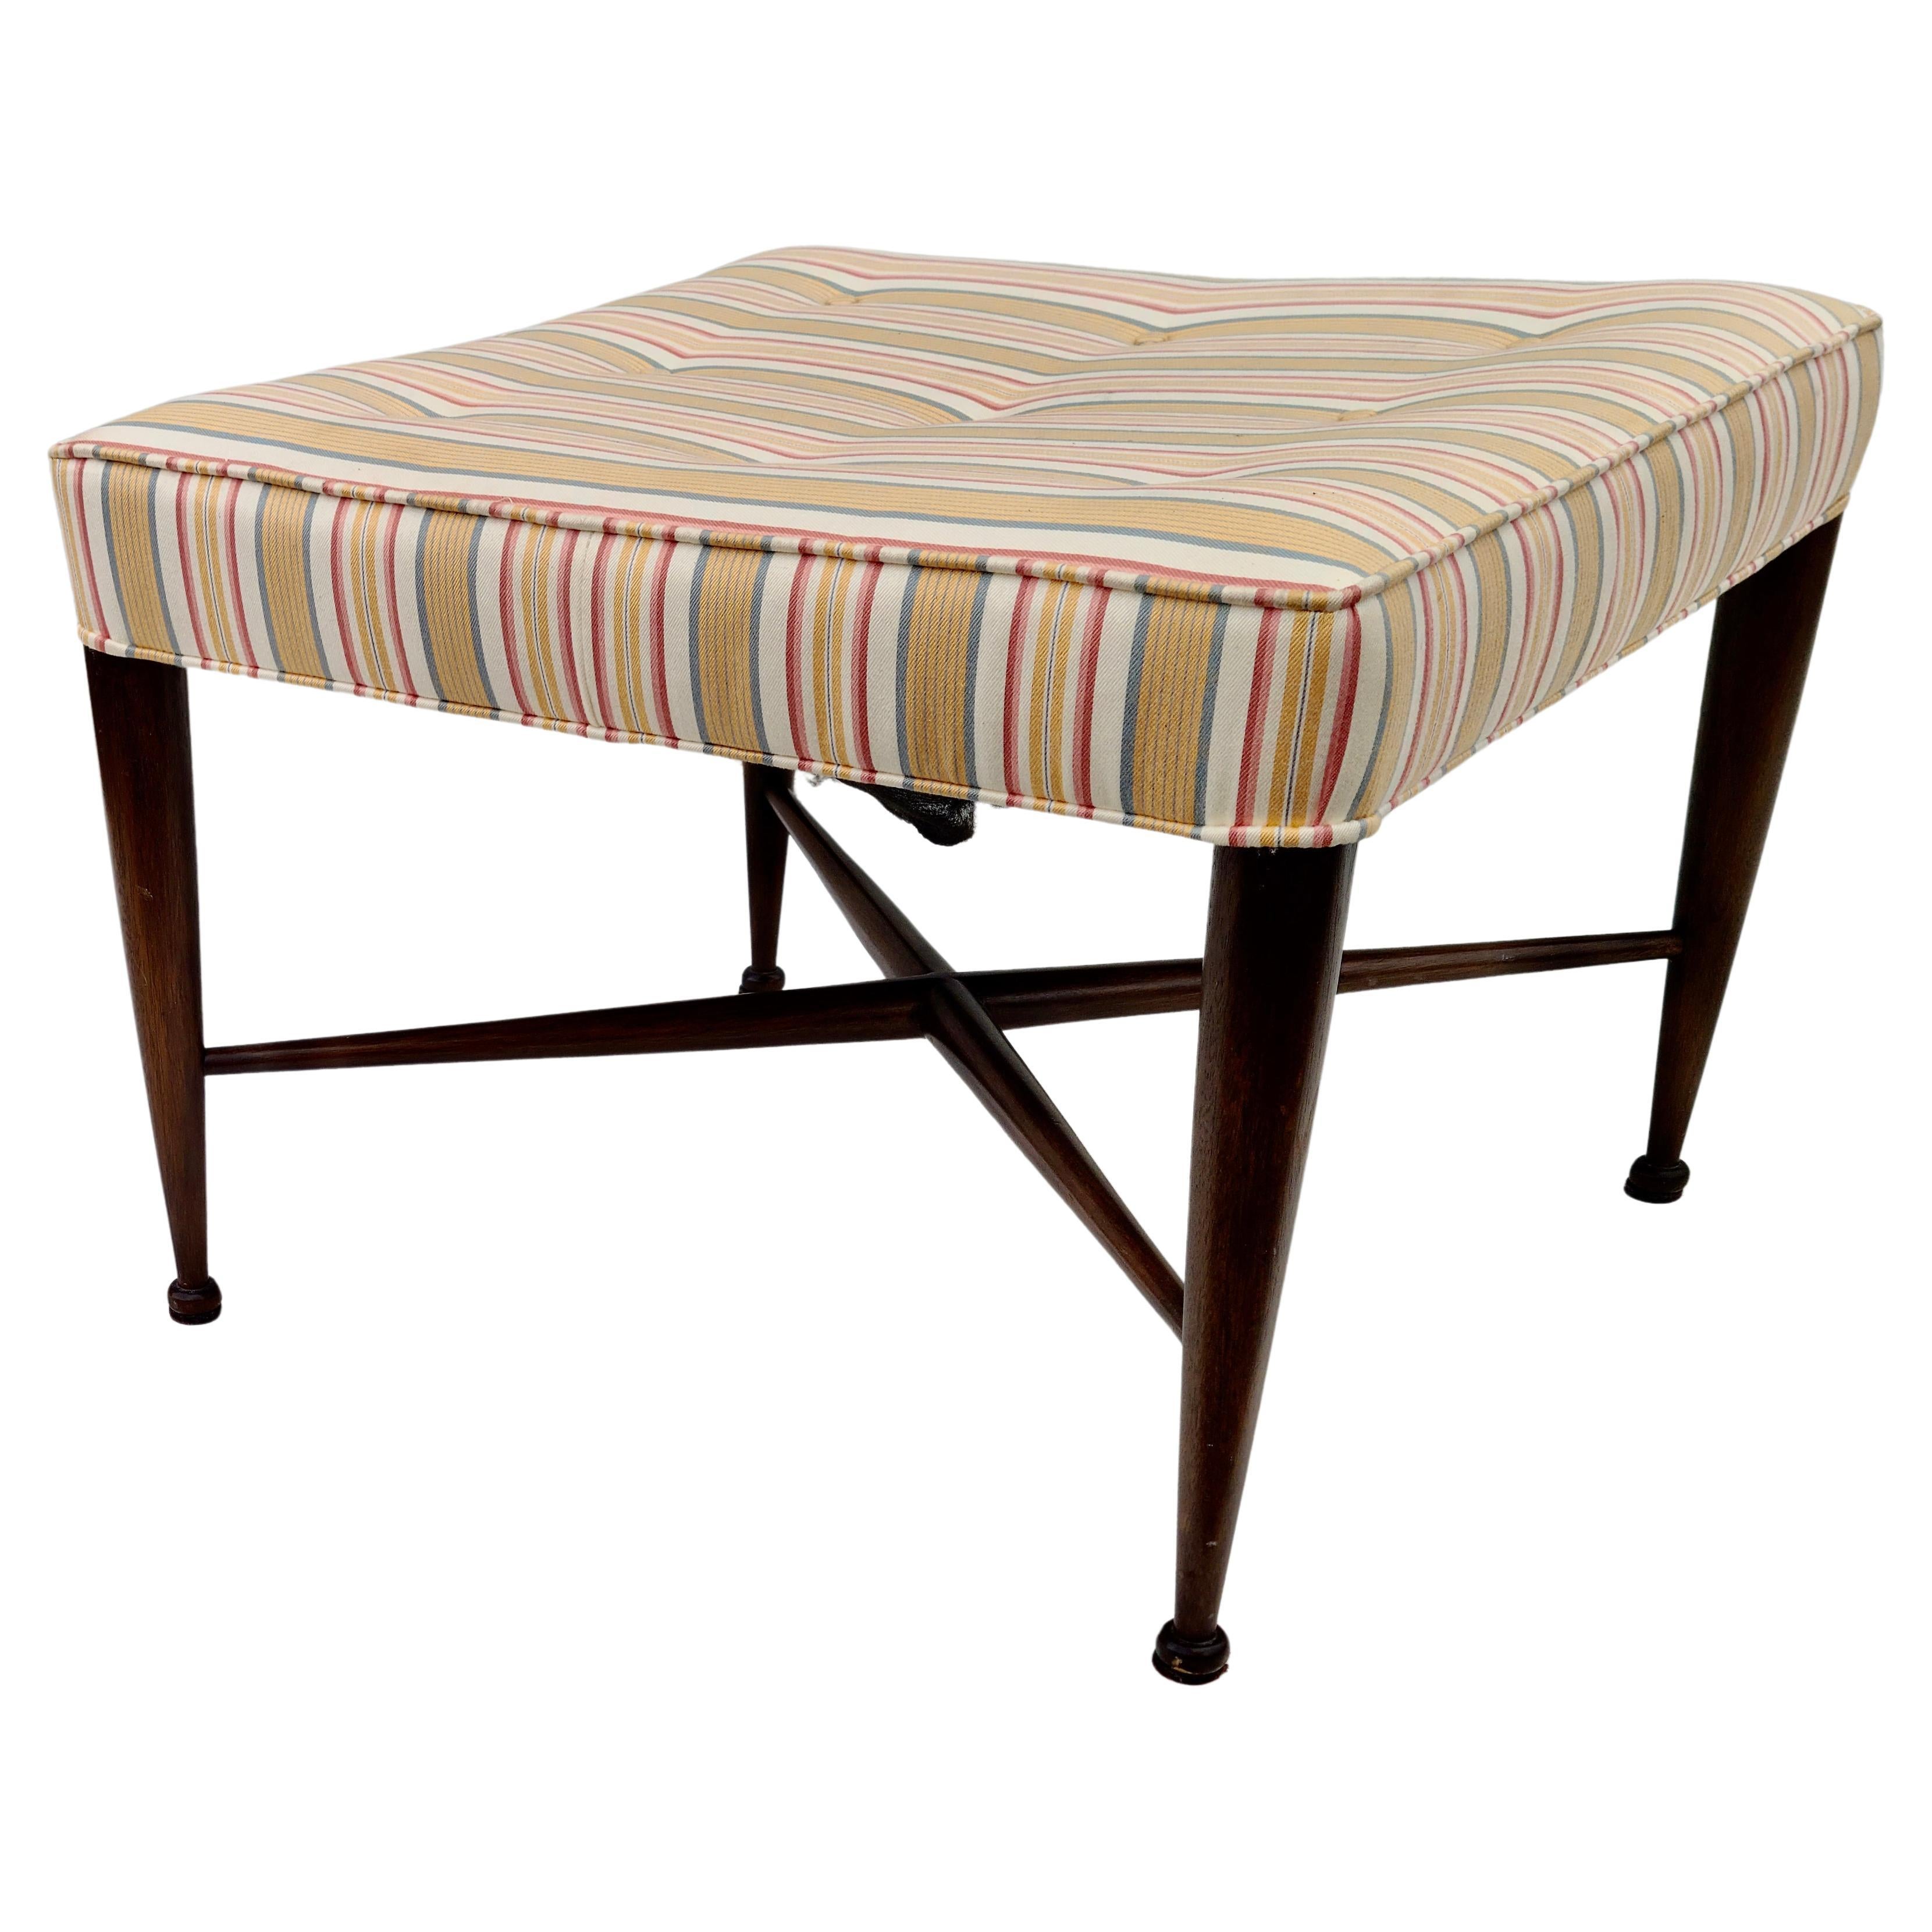 Please feel free to reach out for accurate shipping to your location.

Dunbar Thebes Stool. 
Designed by Edward Wormley.